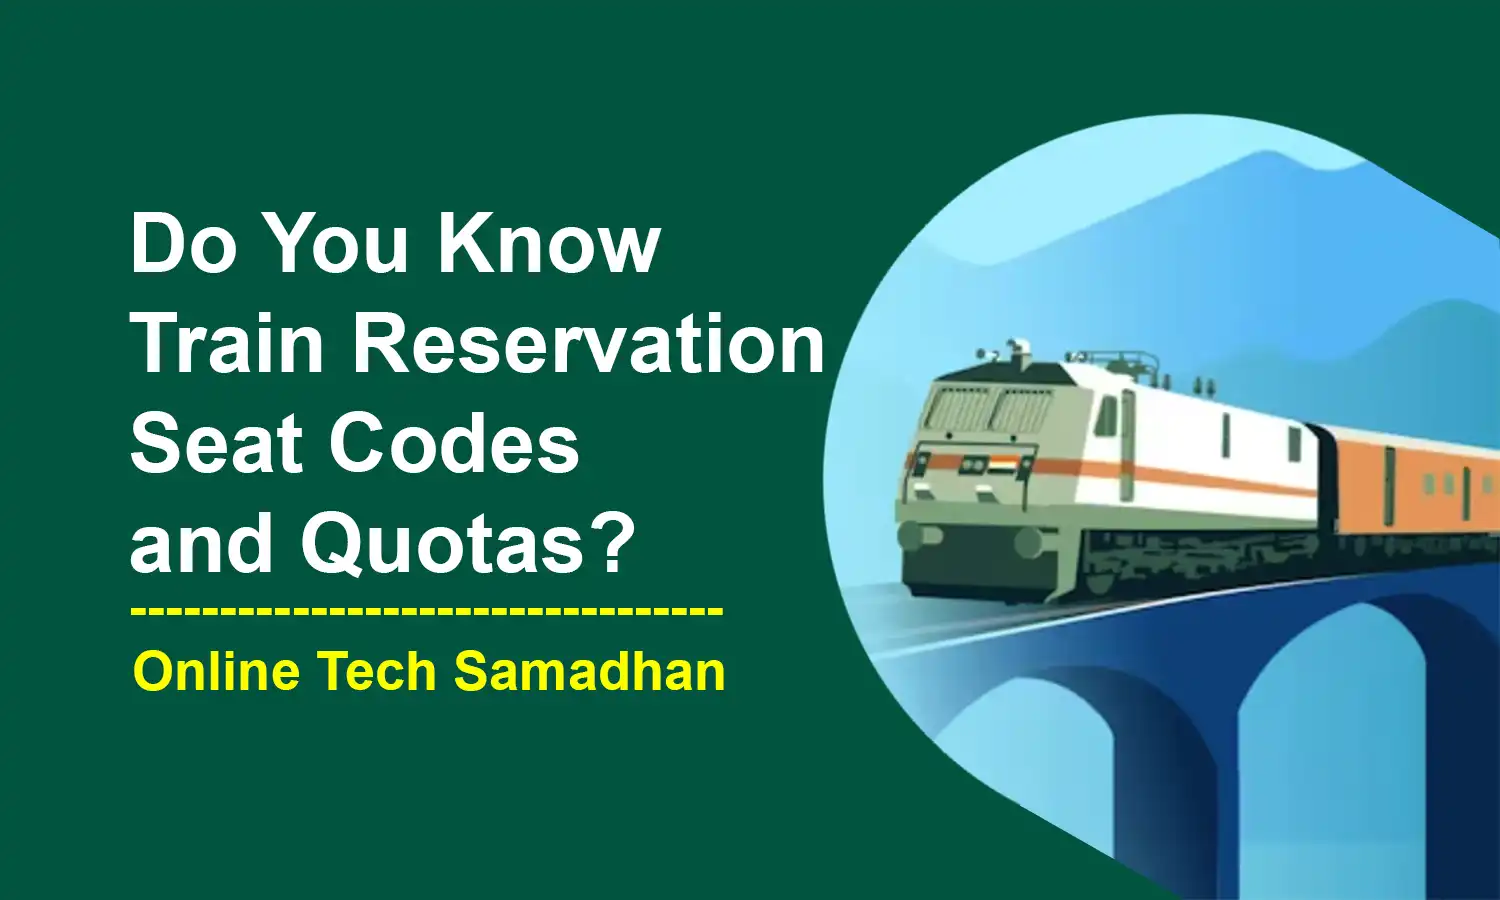 Train Reservation Seat Codes and Quotas